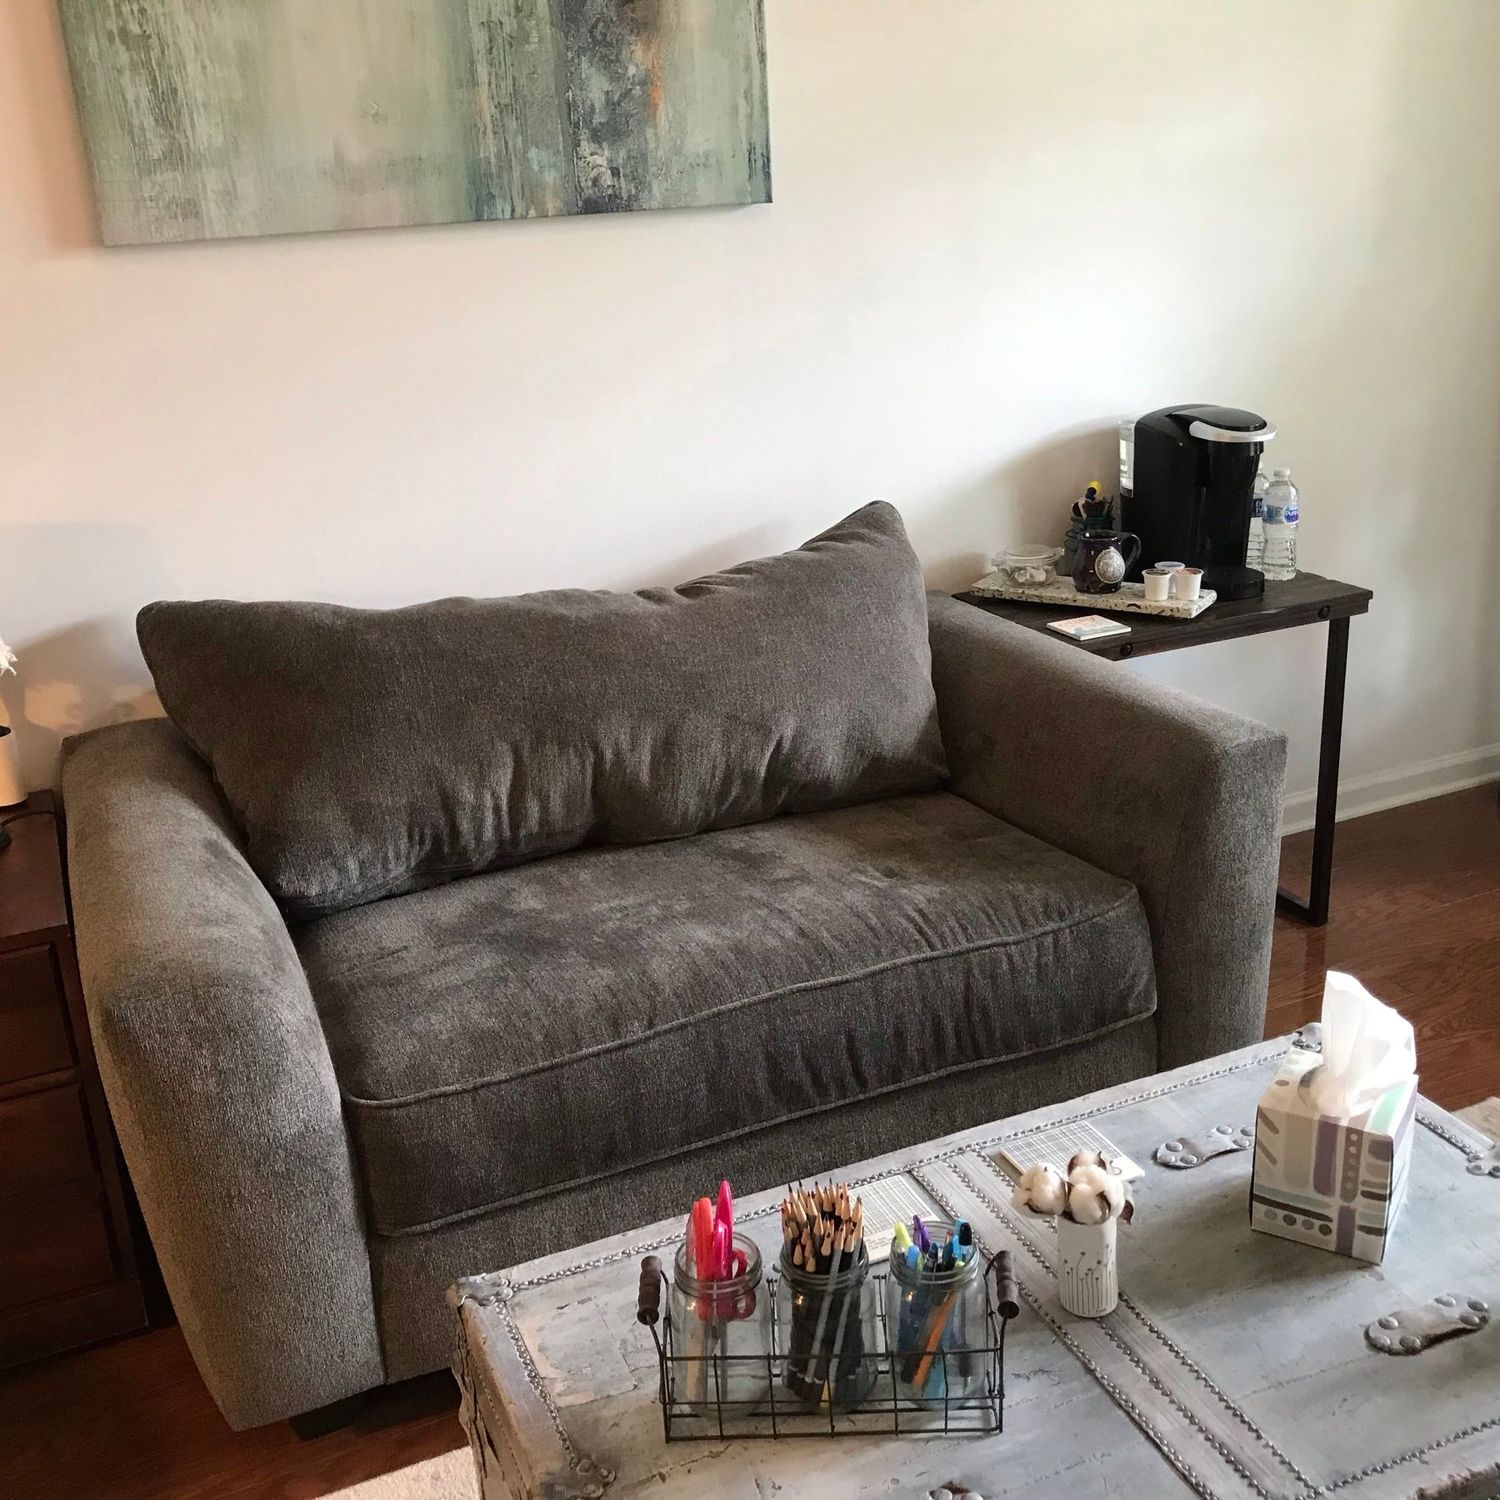 Gallery Photo of Comfy Couch